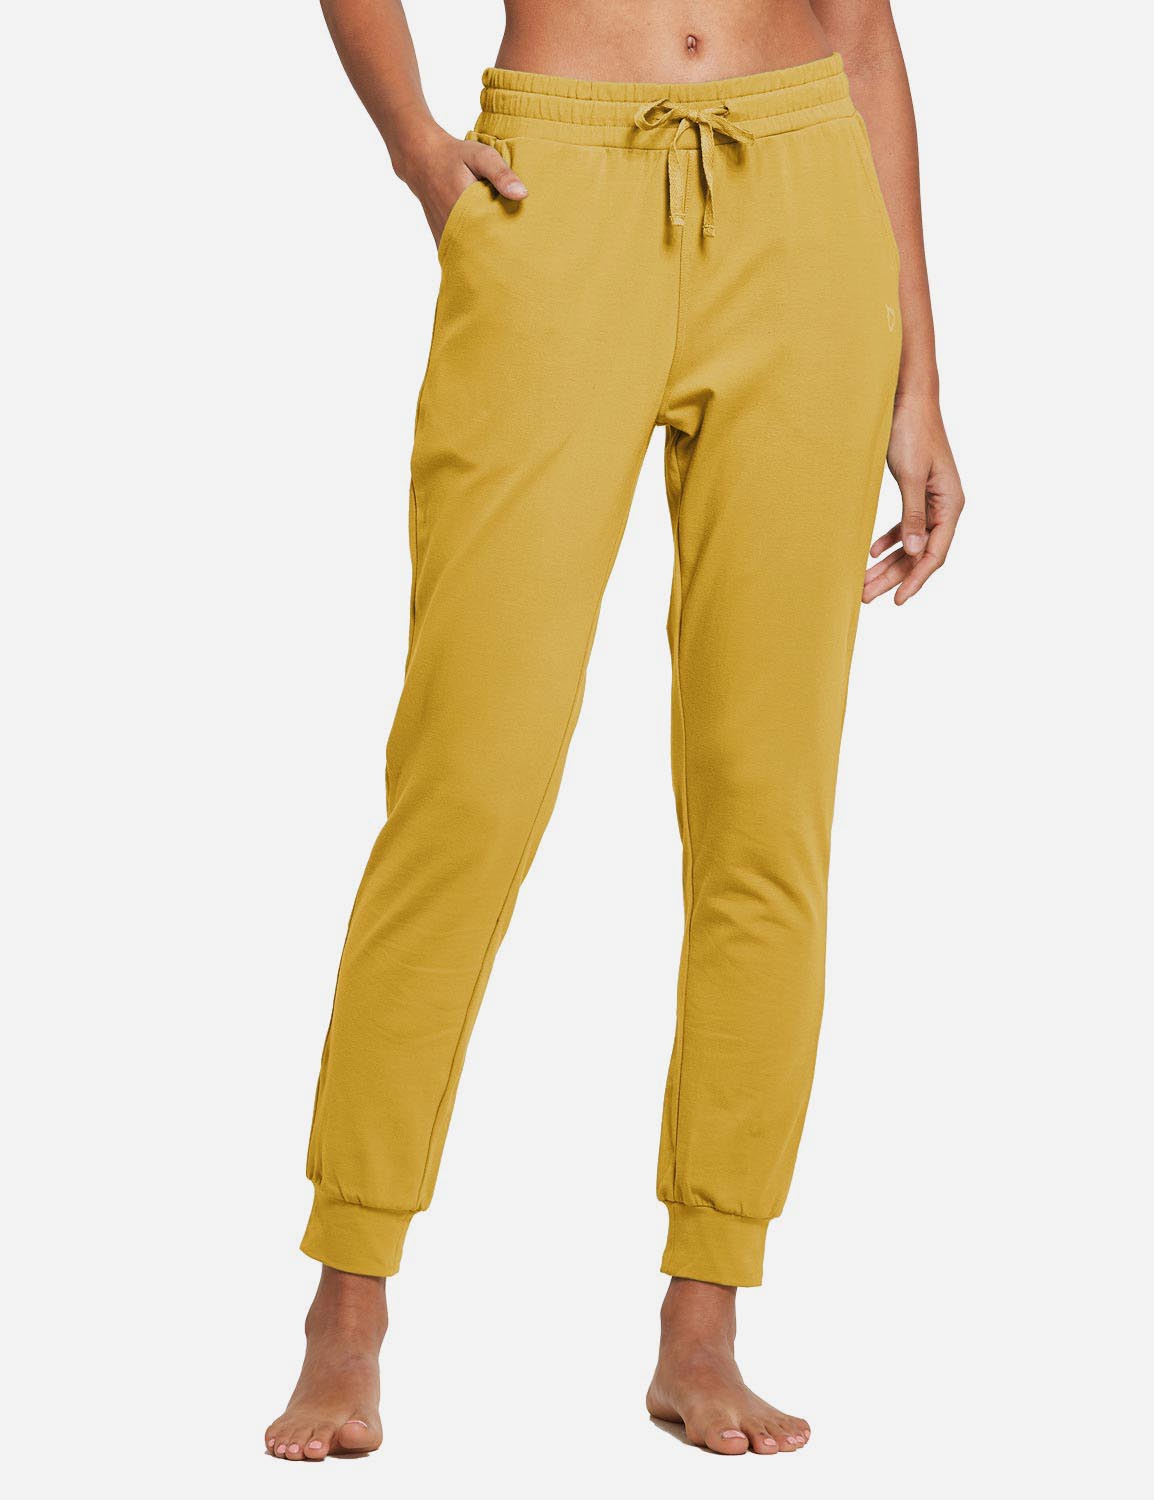 Baleaf Women's Cotton Comfy Pocketed & Tapered Weekend Joggers abh103 Misted Yellow Front